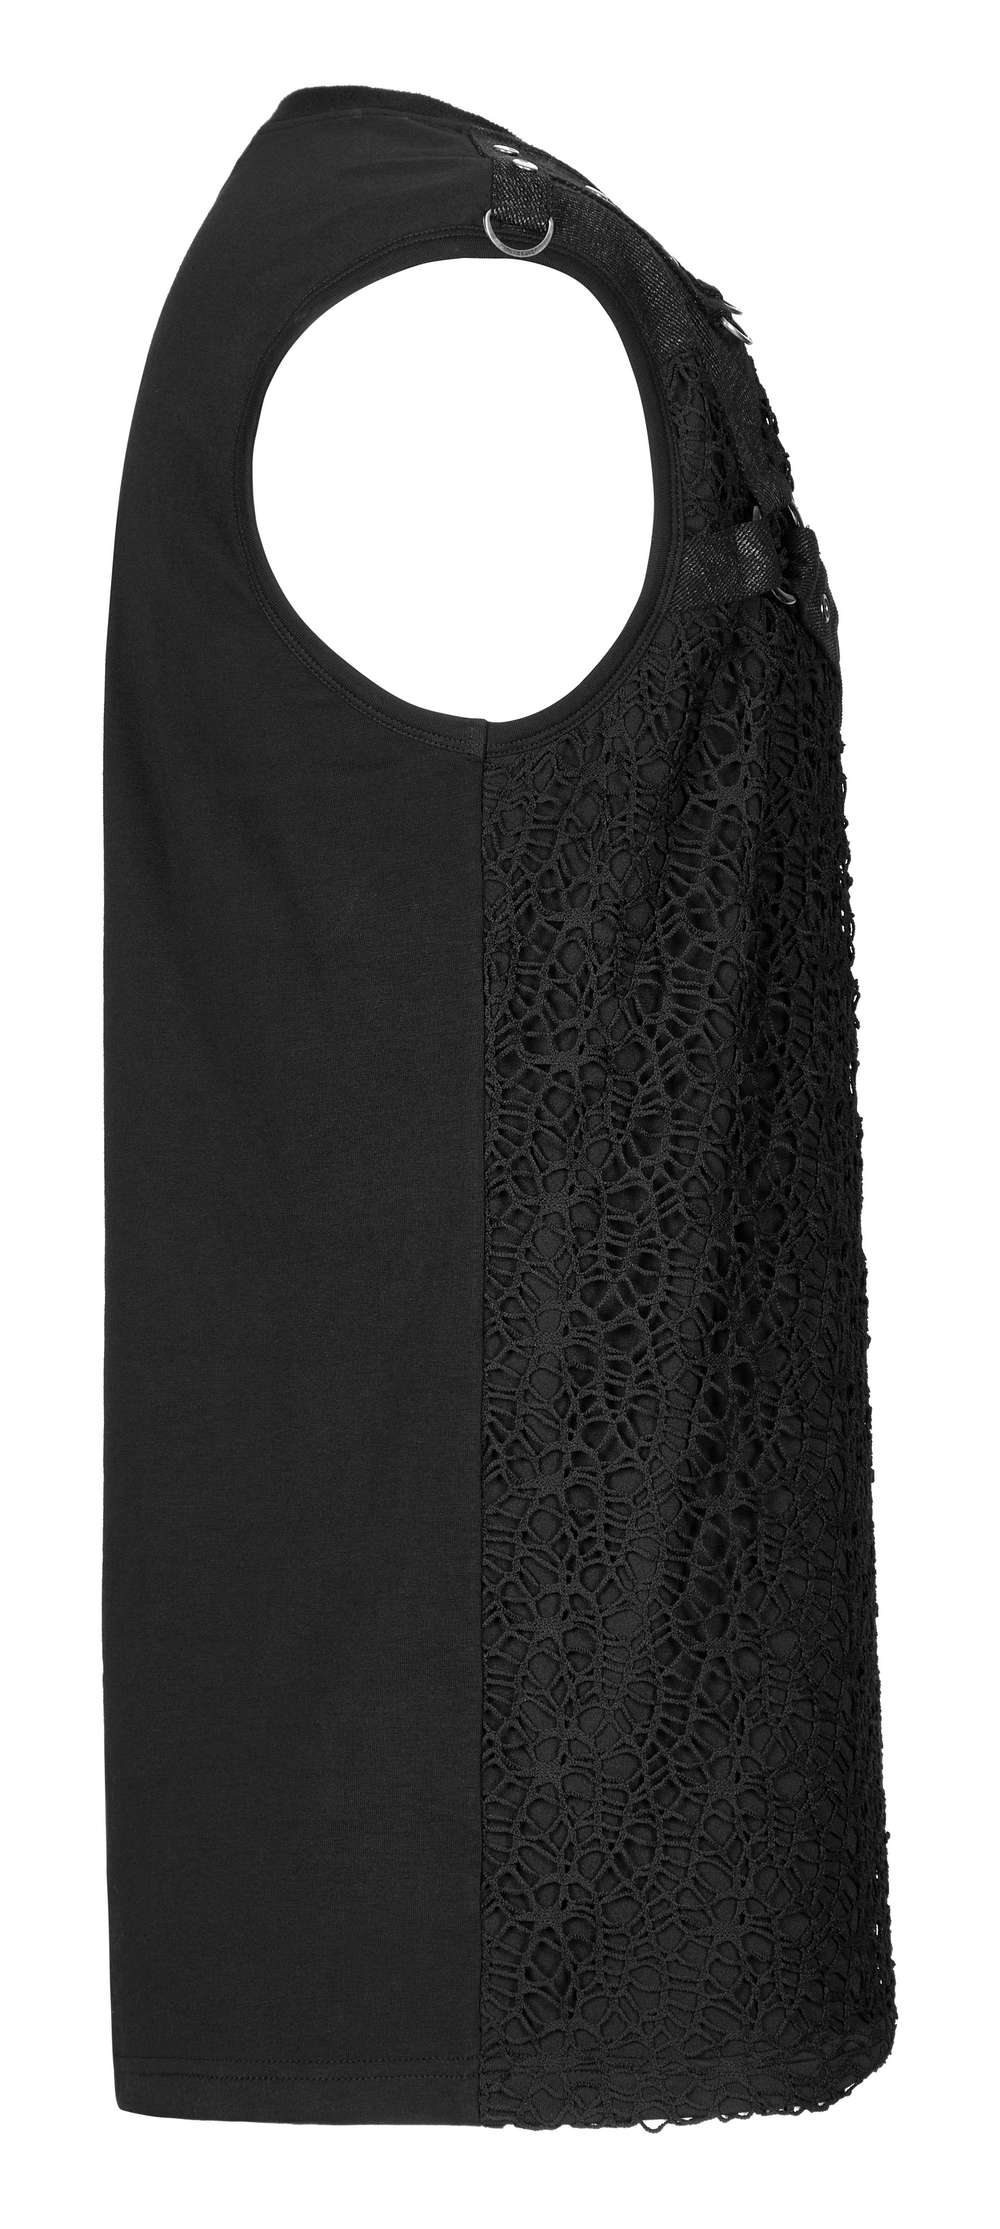 Black Punk Mesh Tank Top with Leather Accents